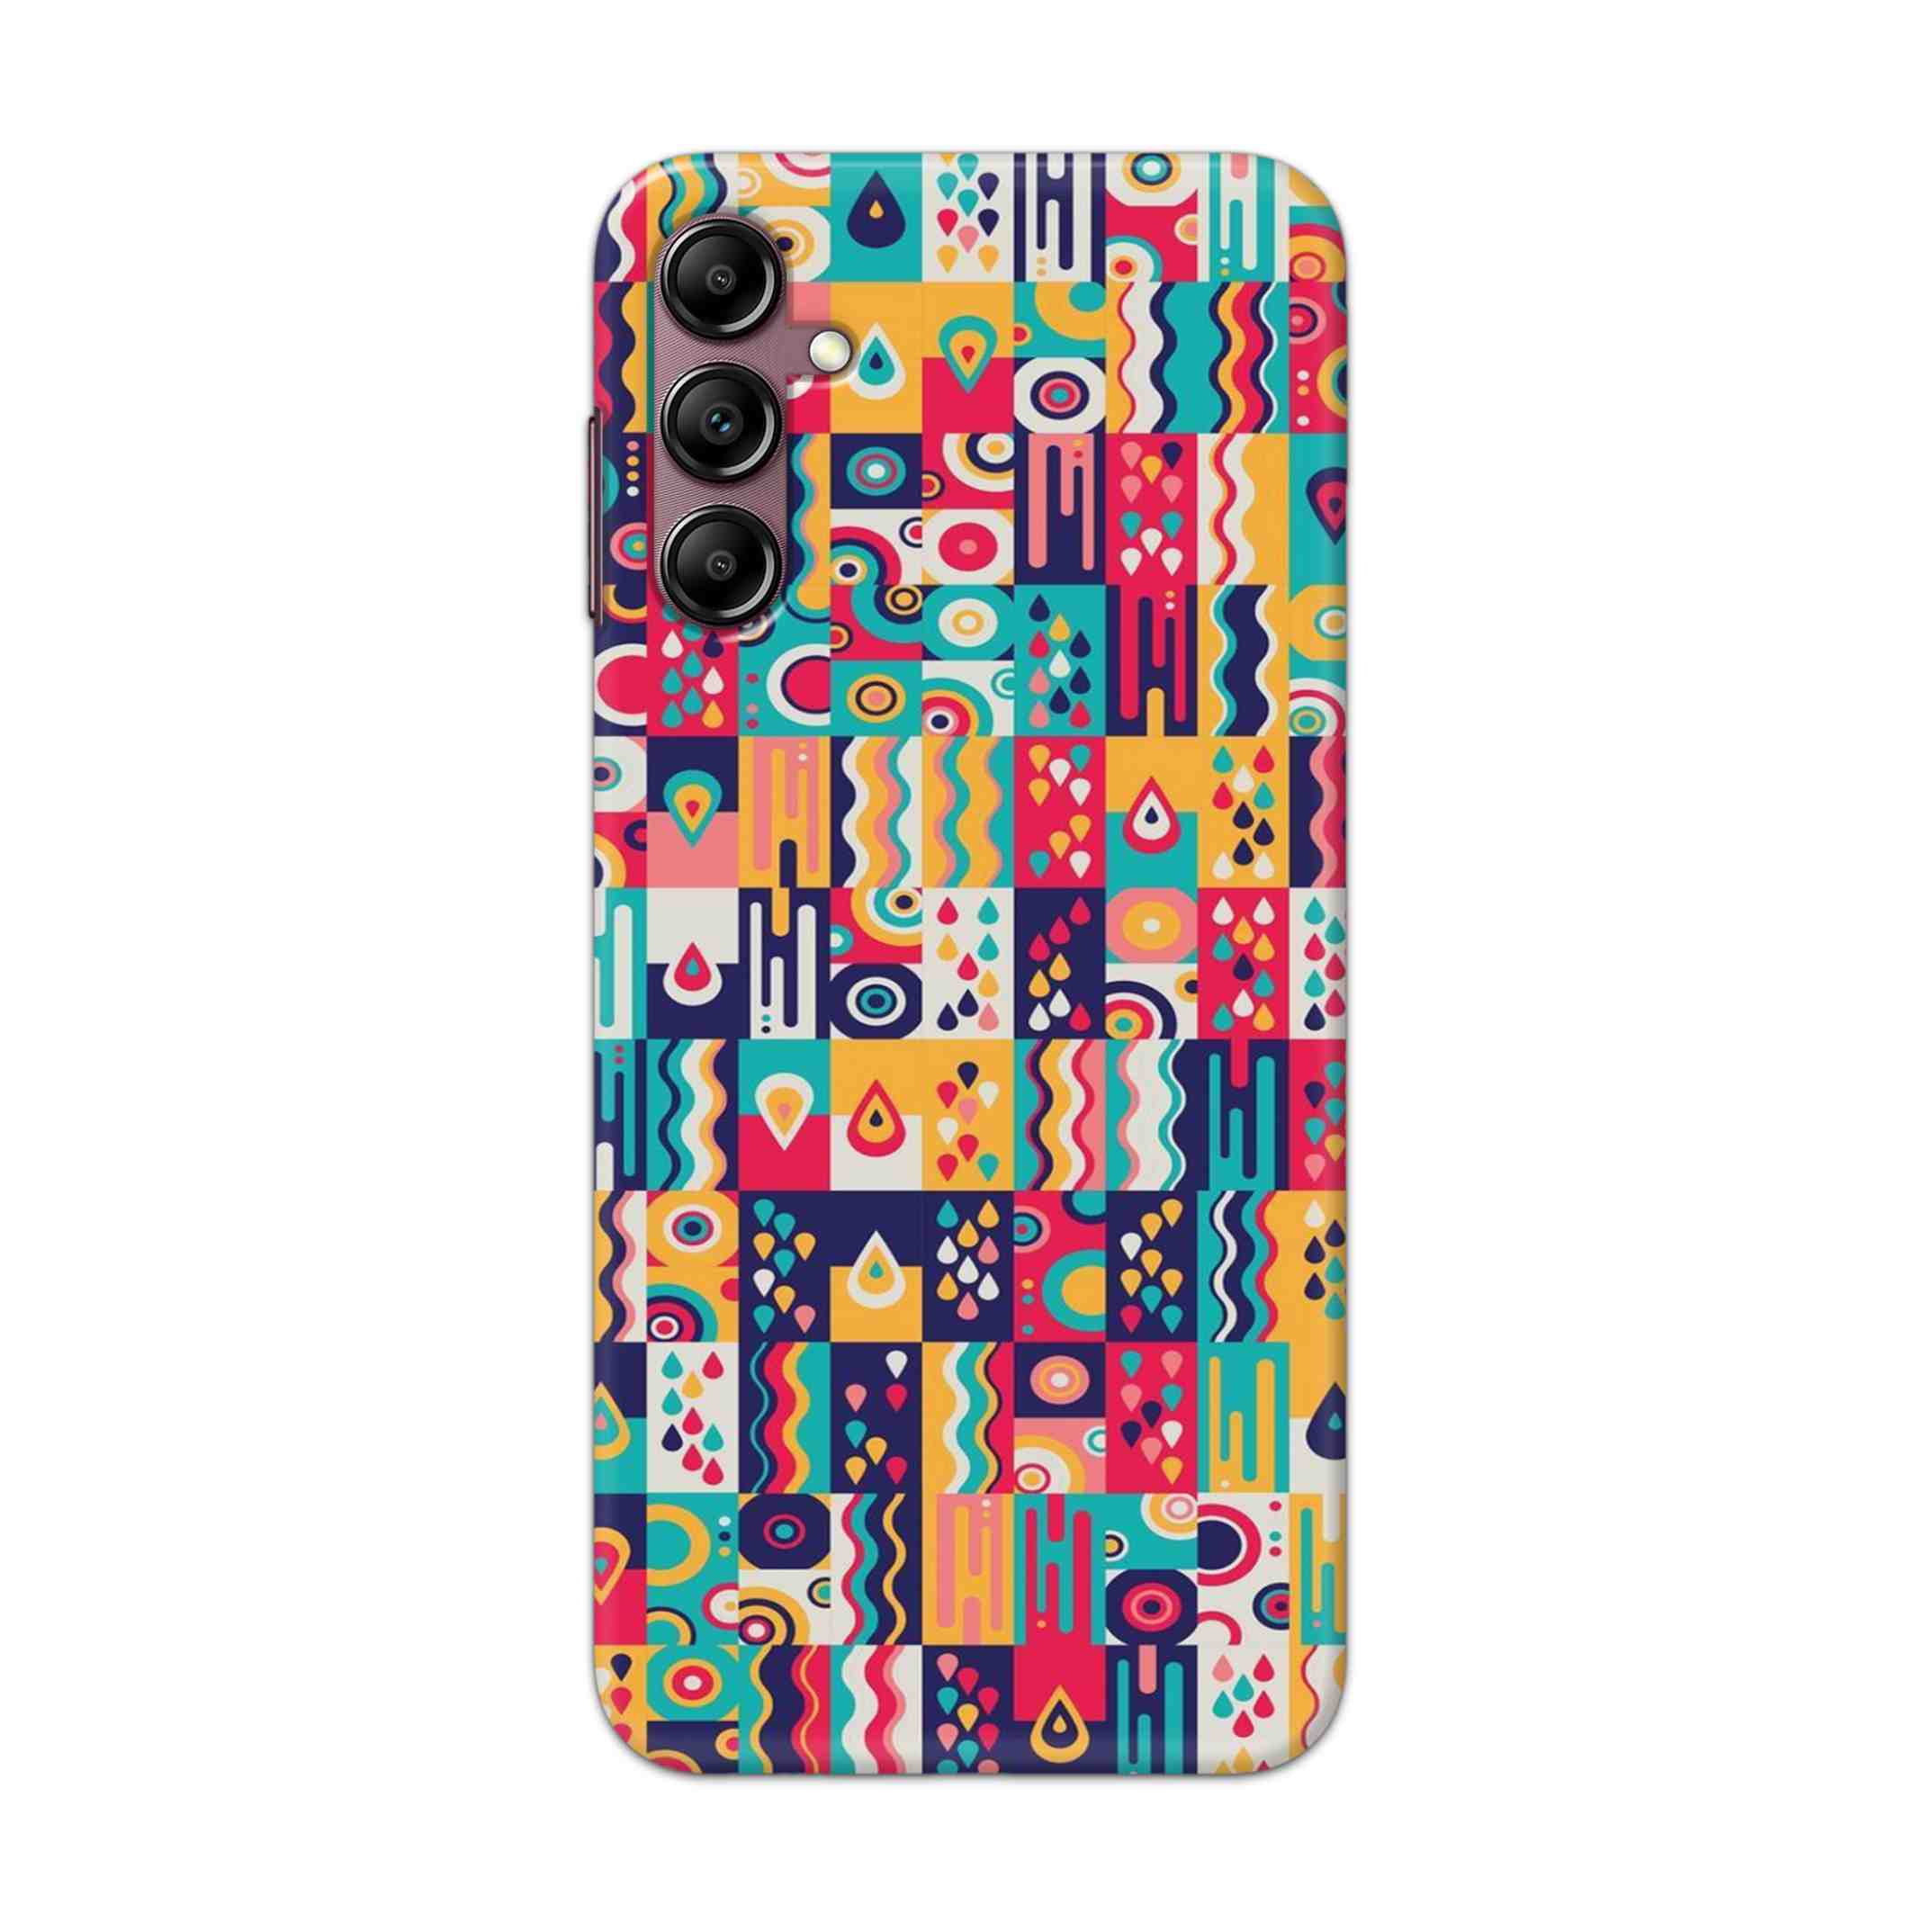 Buy Art Hard Back Mobile Phone Case Cover For Samsung Galaxy A14 Online